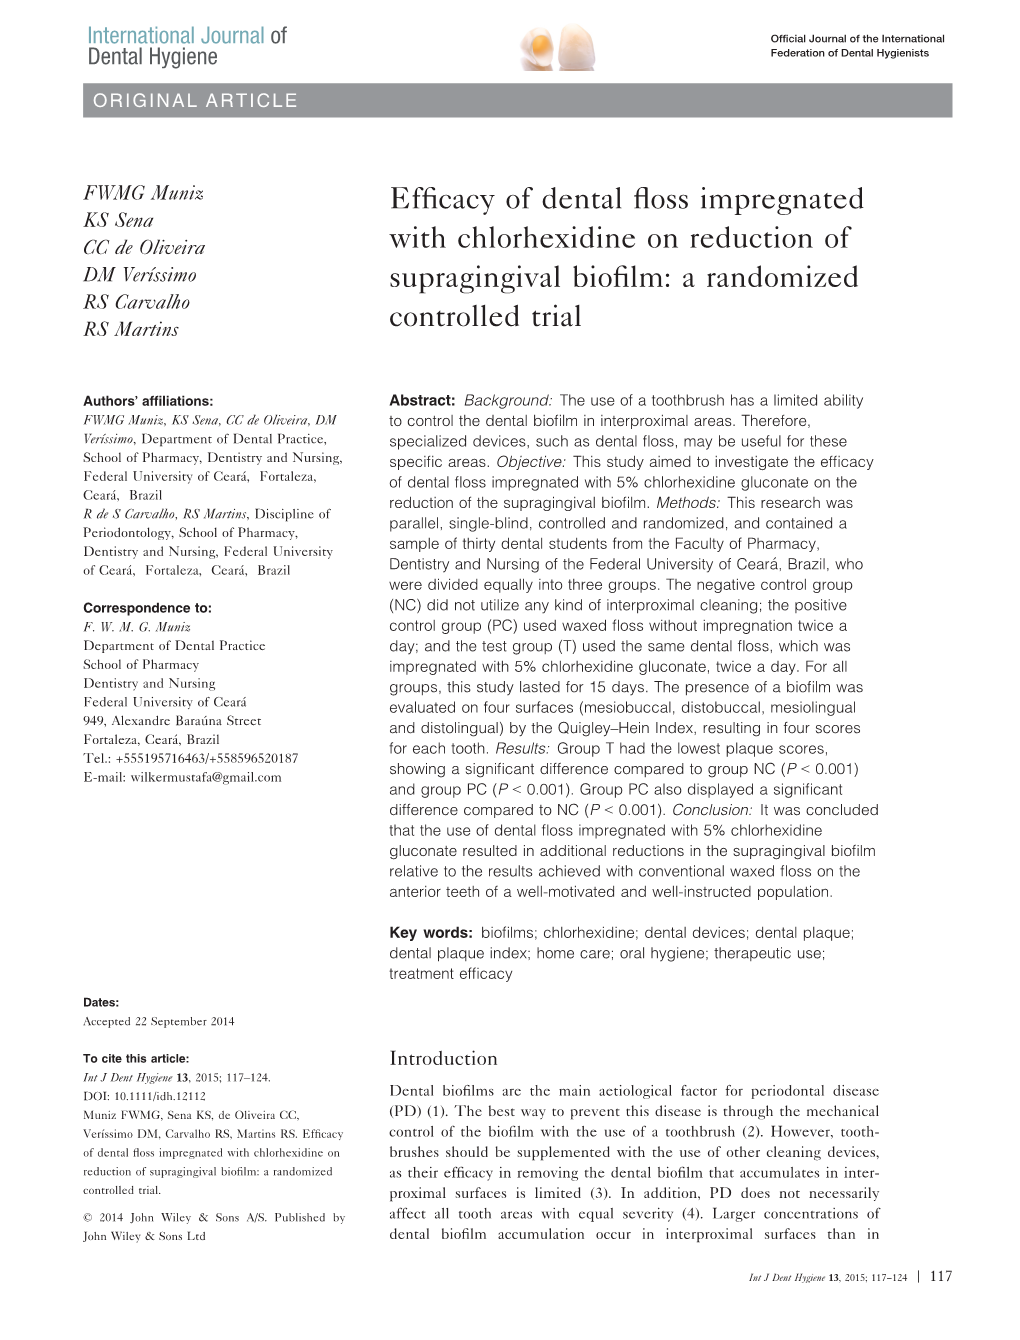 Efficacy of Dental Floss Impregnated with Chlorhexidine on Reduction Of